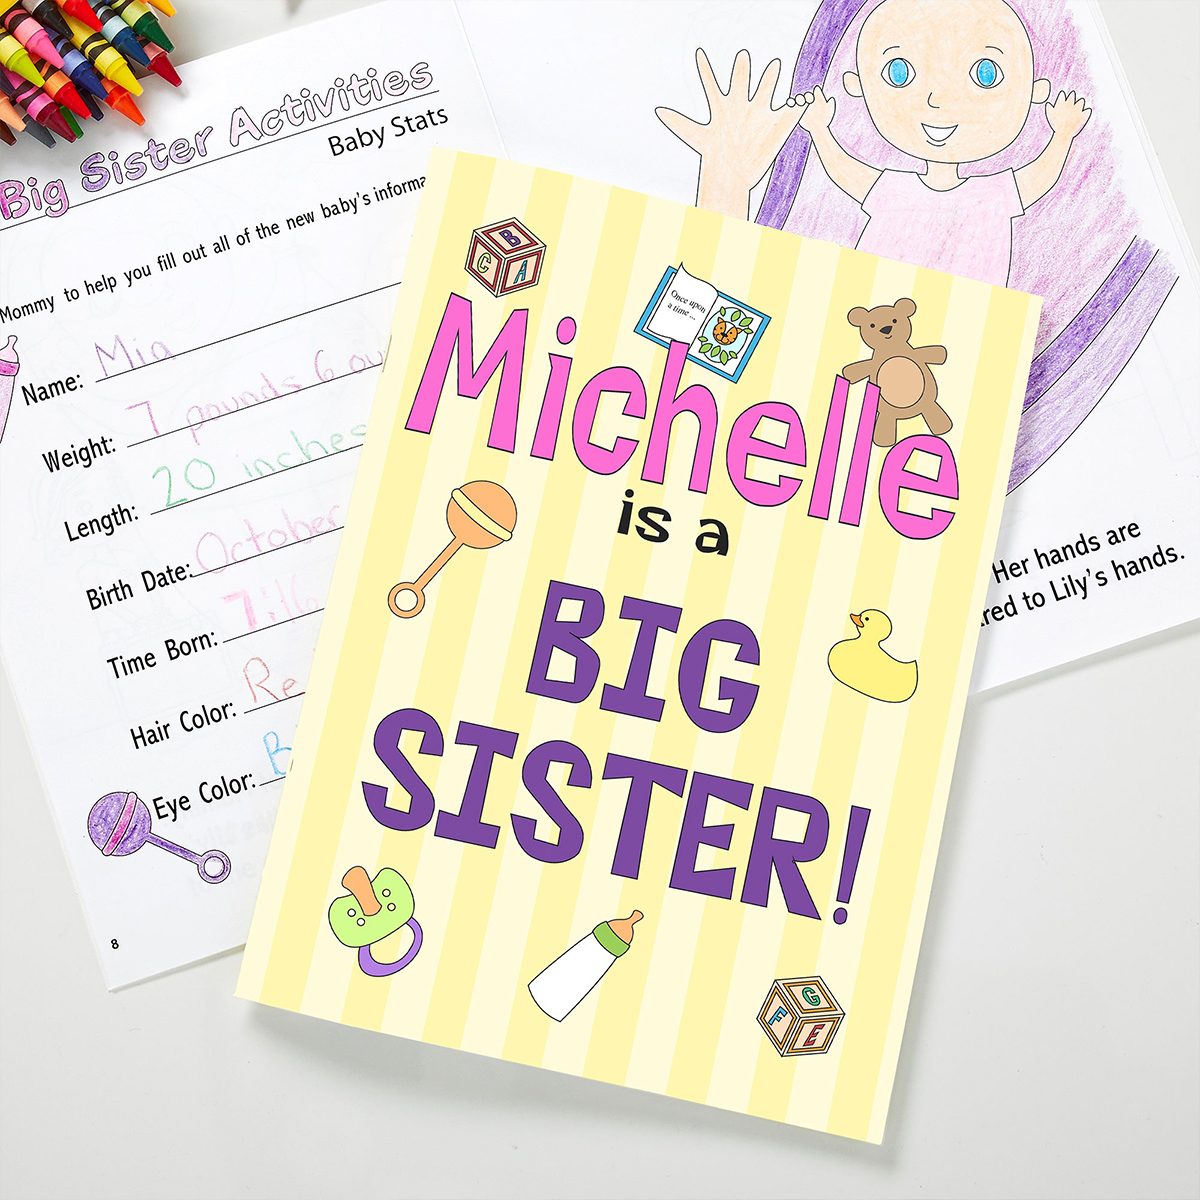 <p>Bringing a gift for a new baby is but don't forget <a href="https://www.rd.com/list/gifts-for-boys/">big brother</a> or sister. This <a href="https://www.personalizationmall.com/Personalized-Kids-Coloring-Books-Big-Sister-Big-Brother-p12336.prod" rel="noopener noreferrer">personalized coloring book</a> makes them the star of the story while teaching them all about the newest member of their family. This affordable gift features 24 pages of fun pictures, games, puzzles and mazes.</p> <p class="listicle-page__cta-button-shop"><a class="shop-btn" href="https://www.personalizationmall.com/Personalized-Kids-Coloring-Books-Big-Sister-Big-Brother-p12336.prod">Shop Now</a></p>